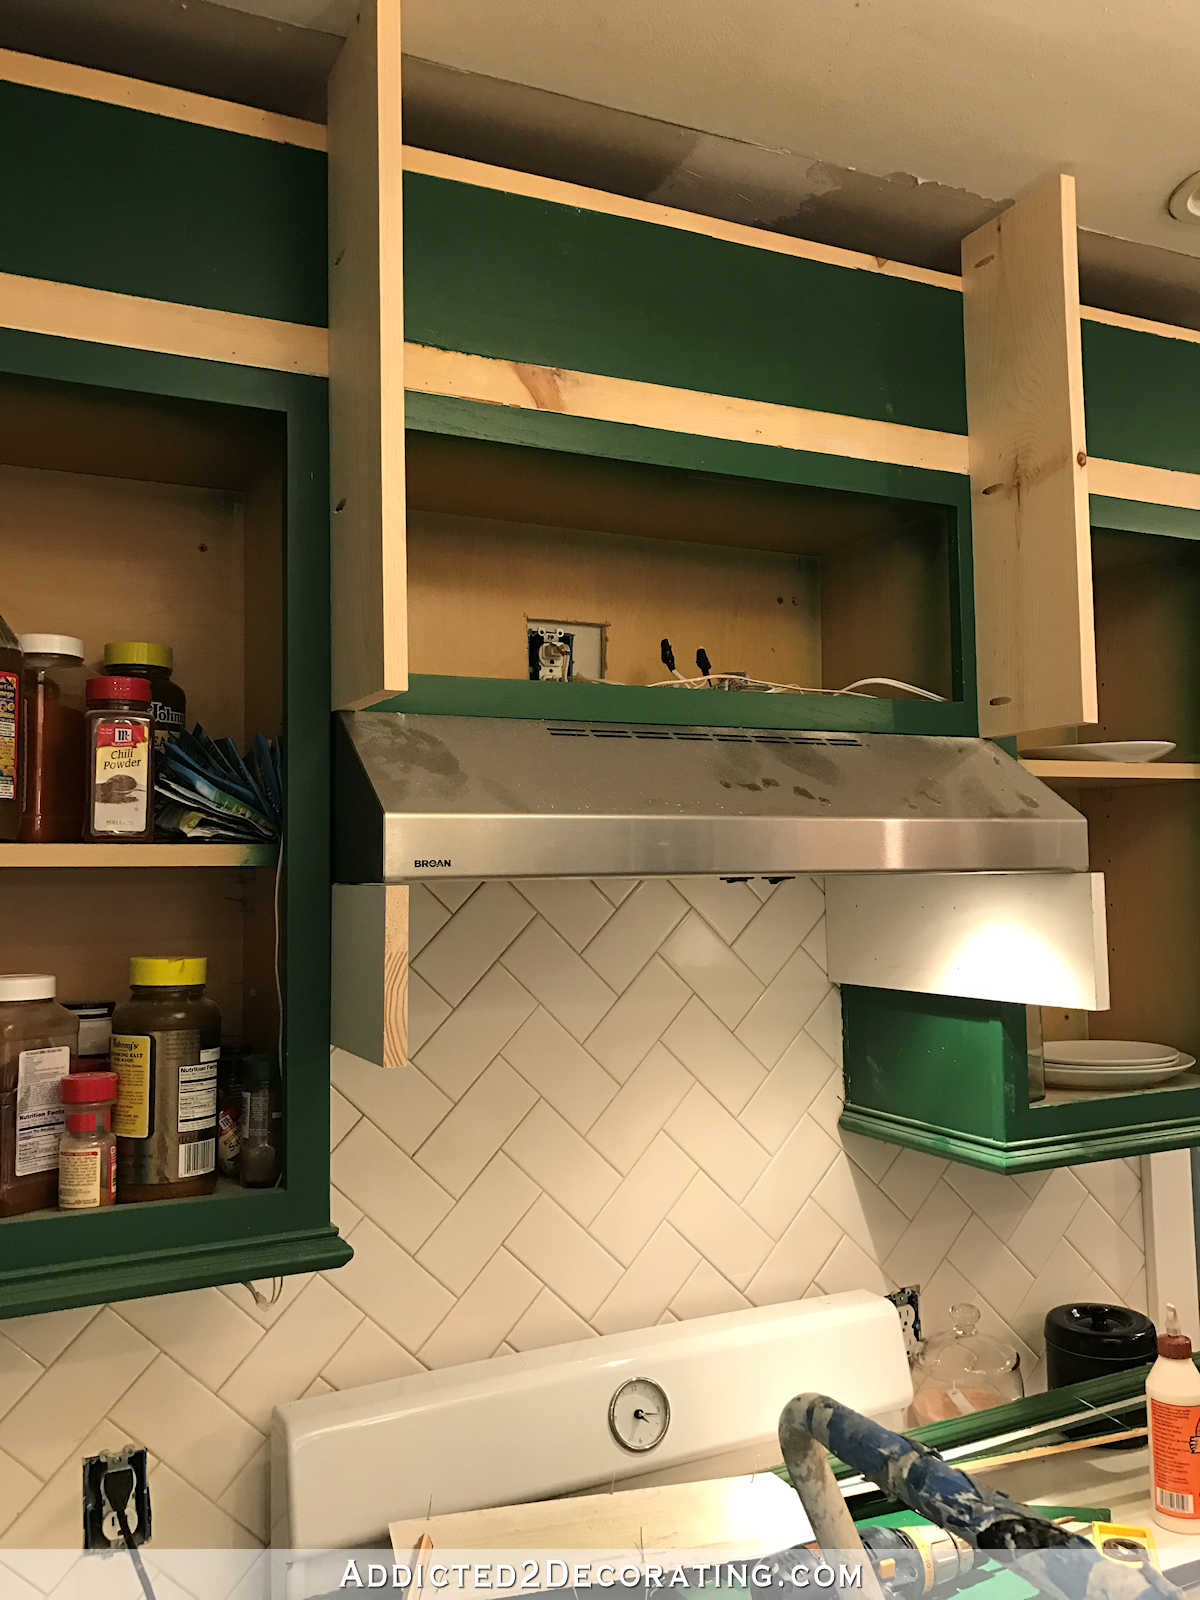 how to build a custom wood range hood cover - 8 - add side support pieces below range hood nailed into side cabinets